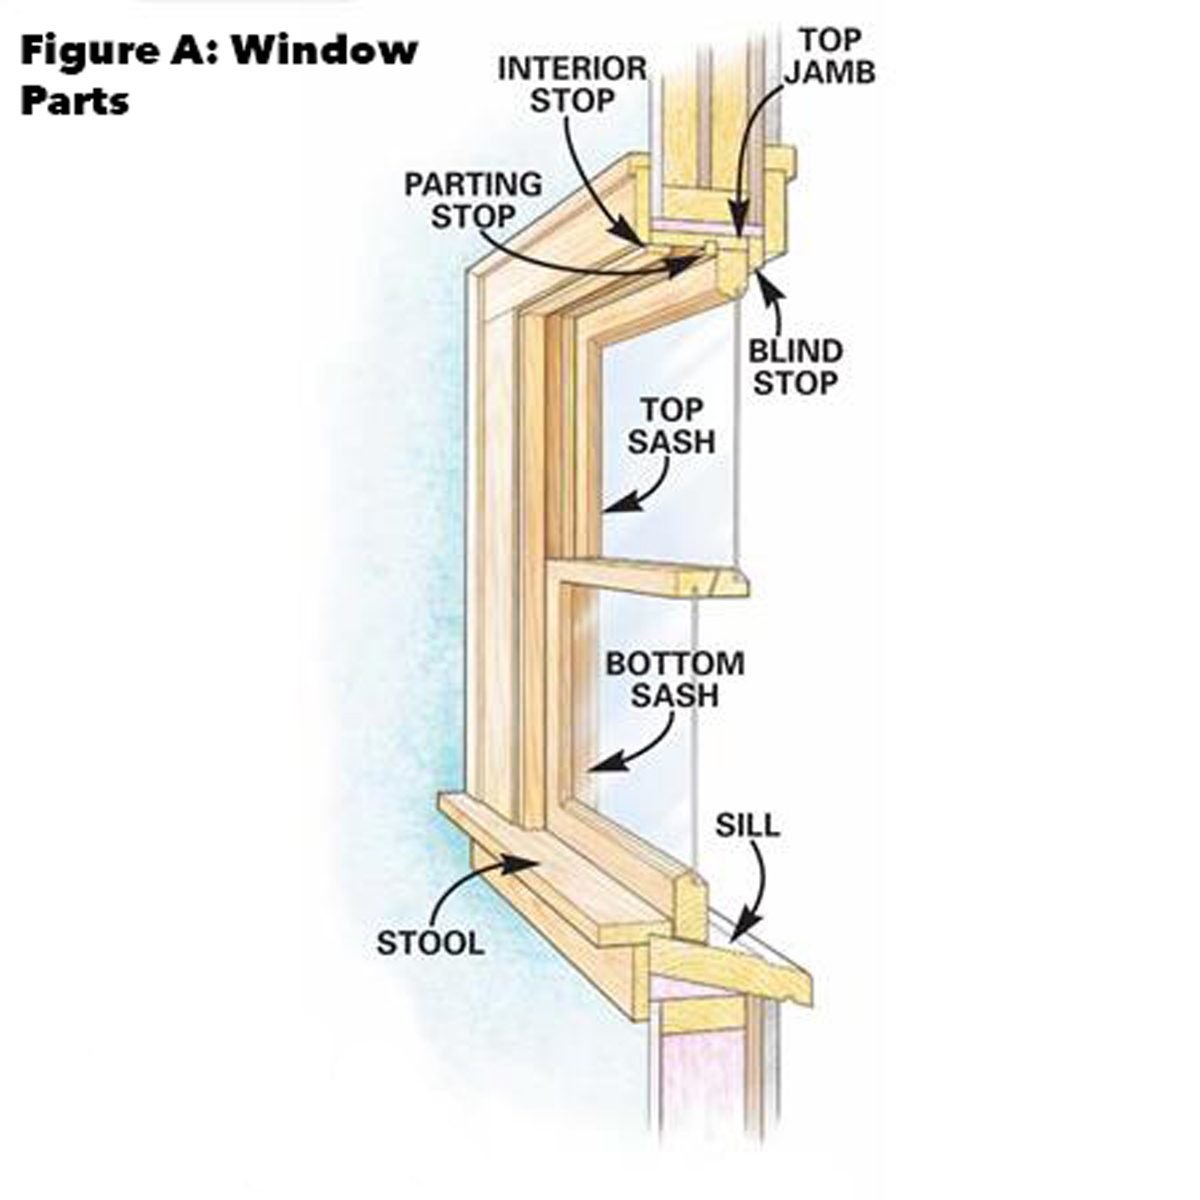 figure a replace double hung window how to replace a window frame